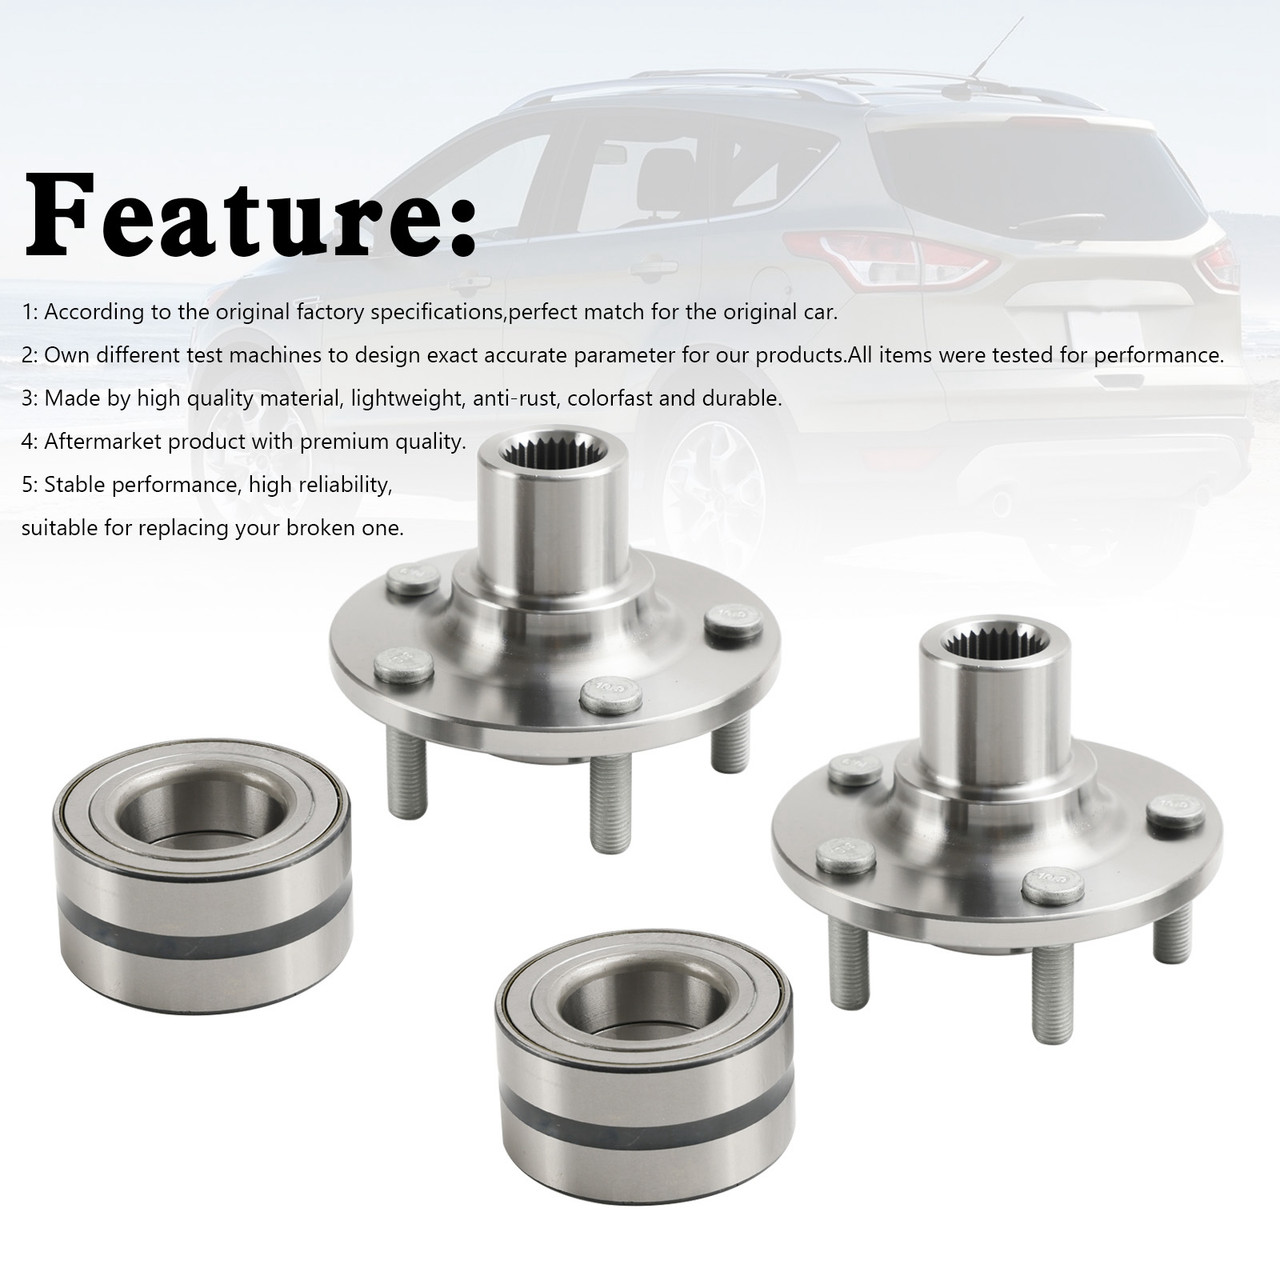 2x Front Wheel Hub Bearing Kits NT510110 For Ford Escape 2013-2019